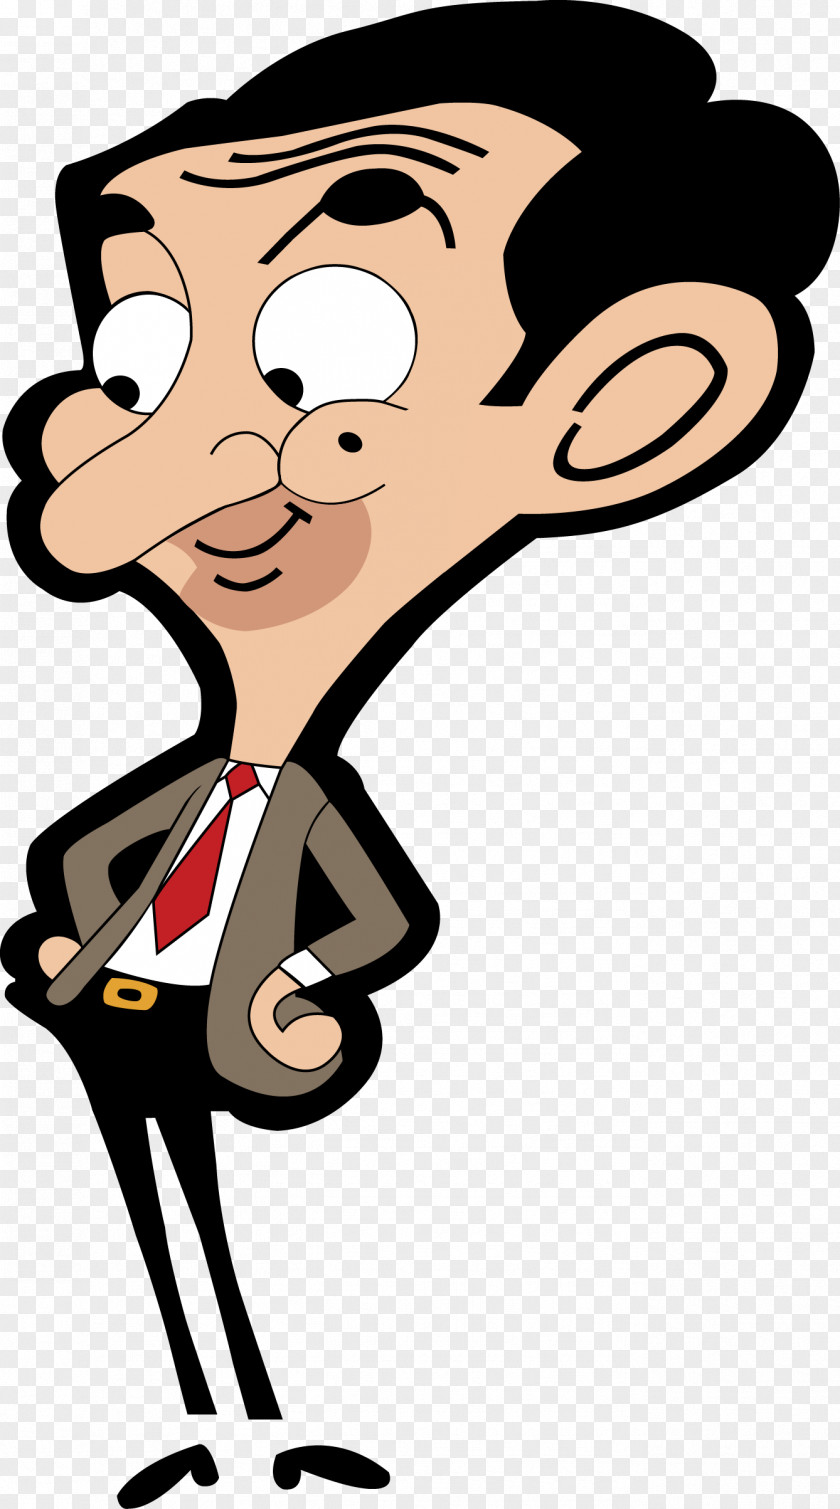 Mr. Bean Cartoon Animated Series Episode YouTube PNG